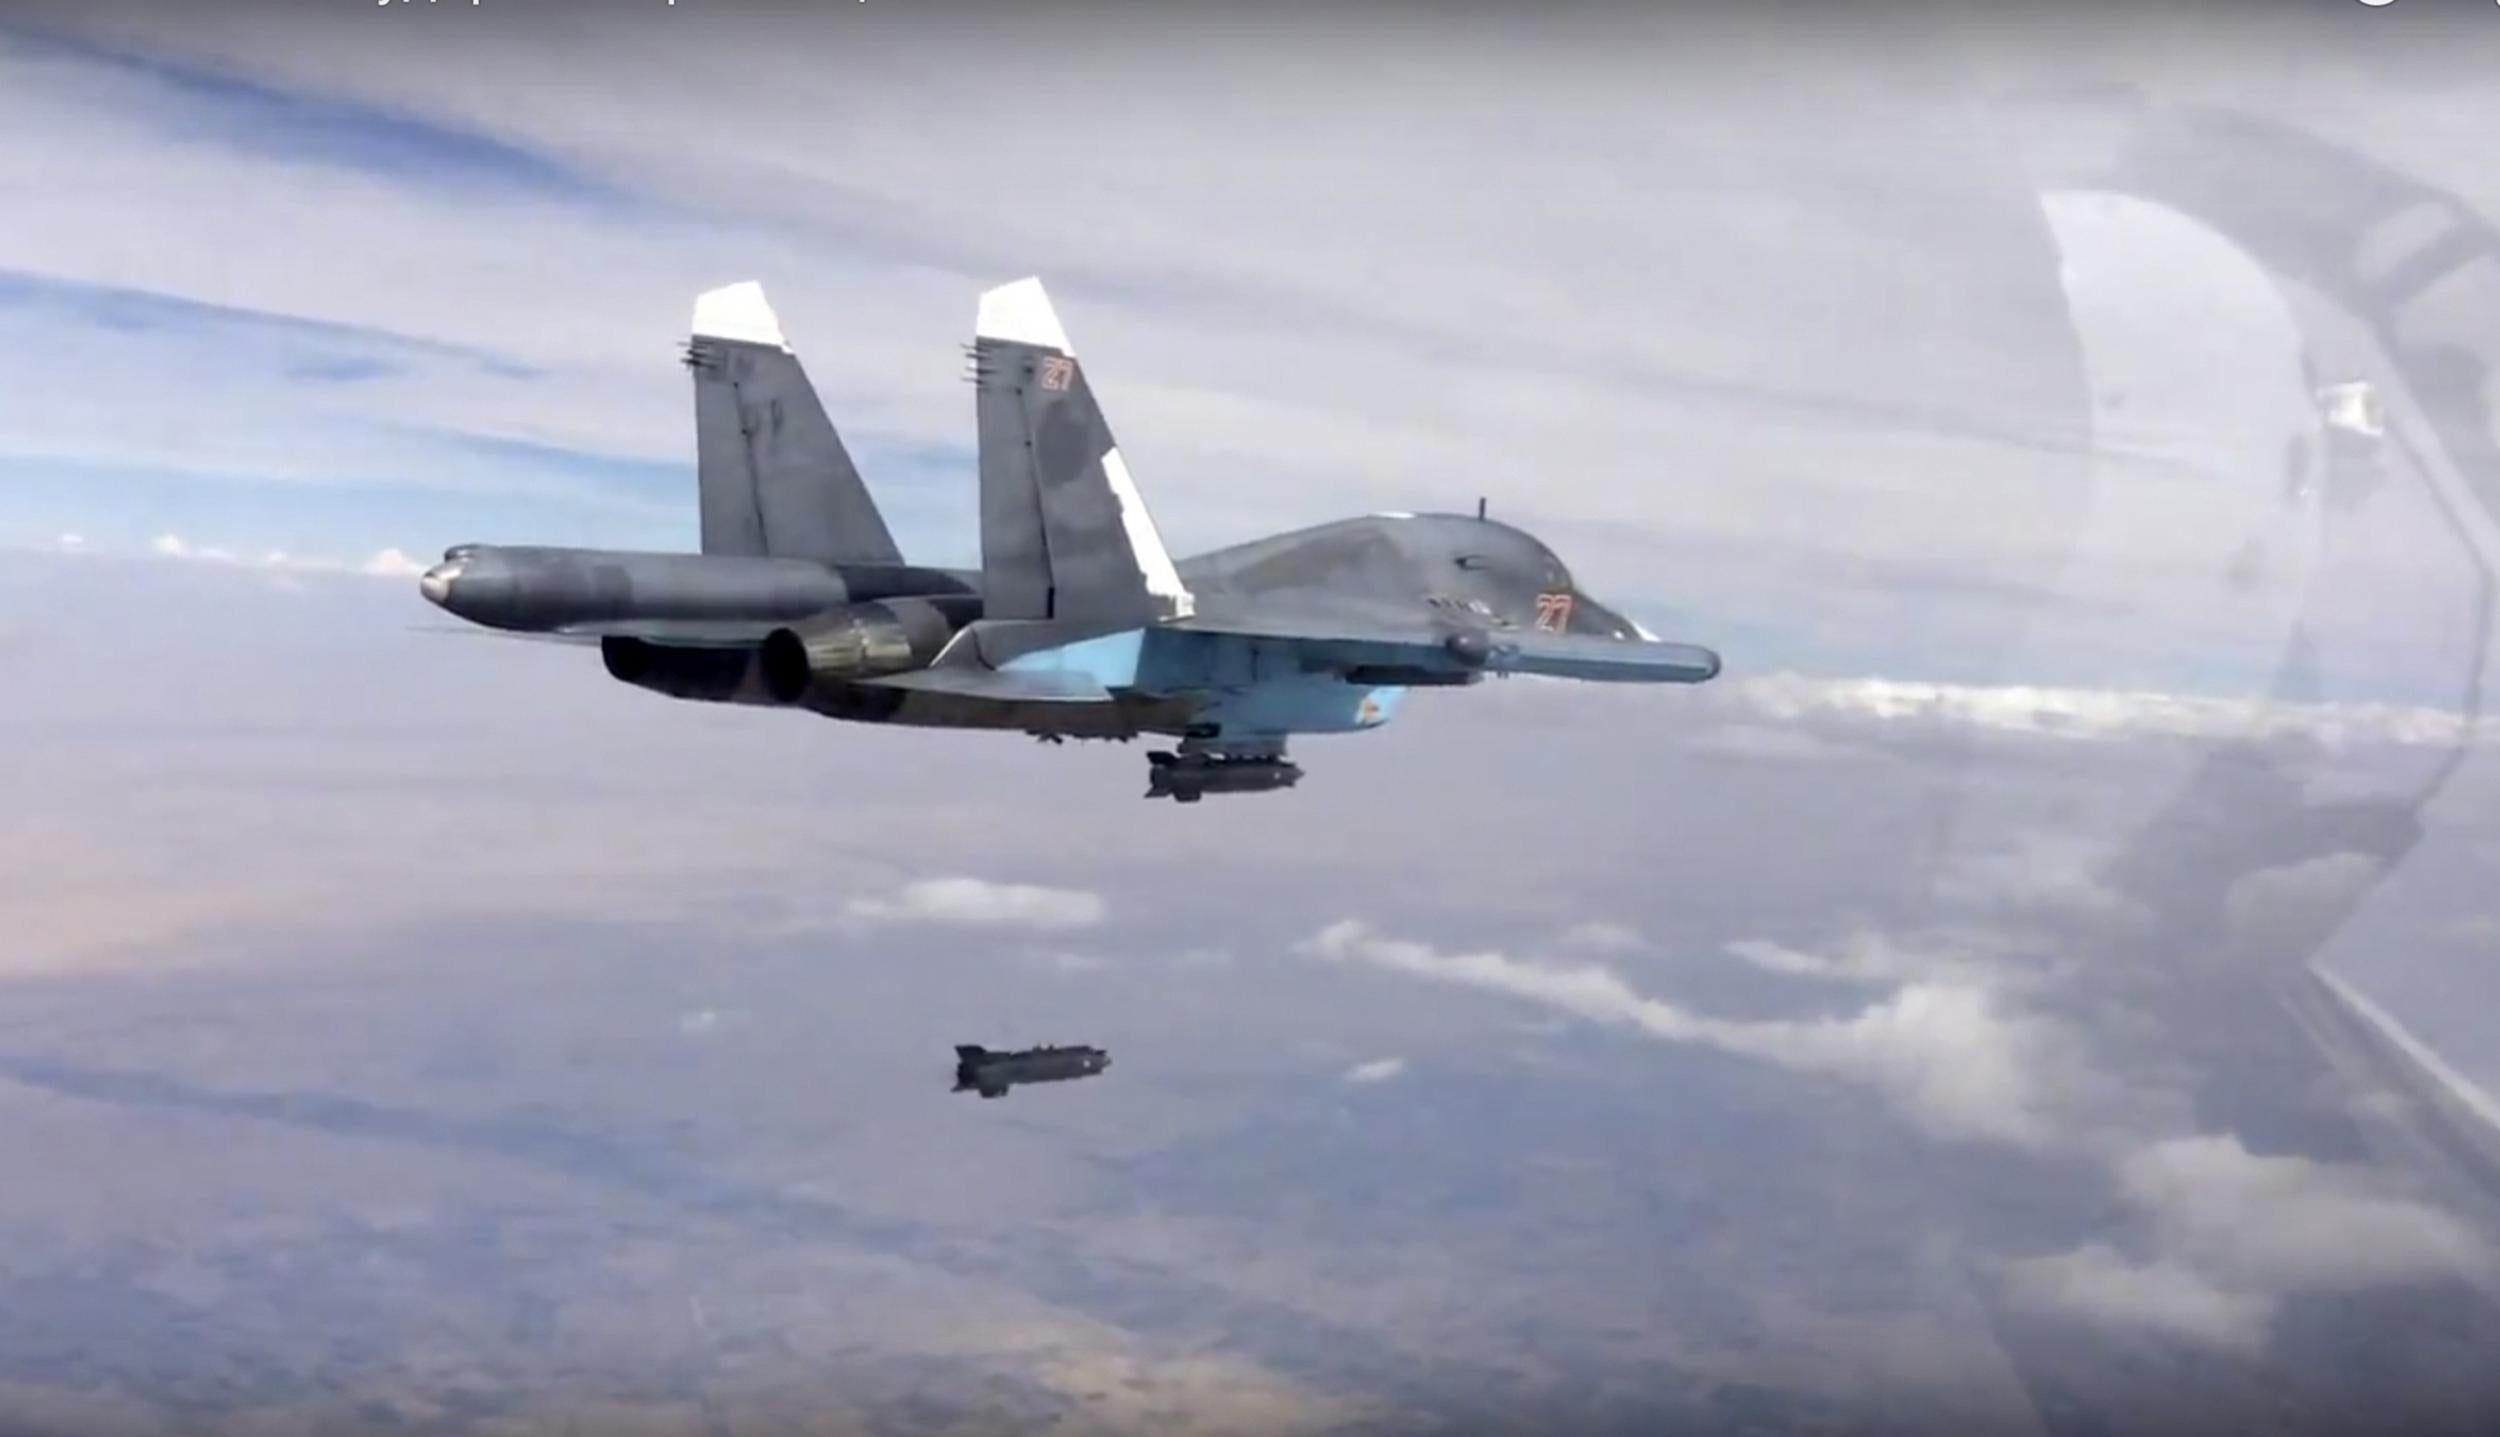 A Russian Su-34 strike fighter releases a bomb over Syria